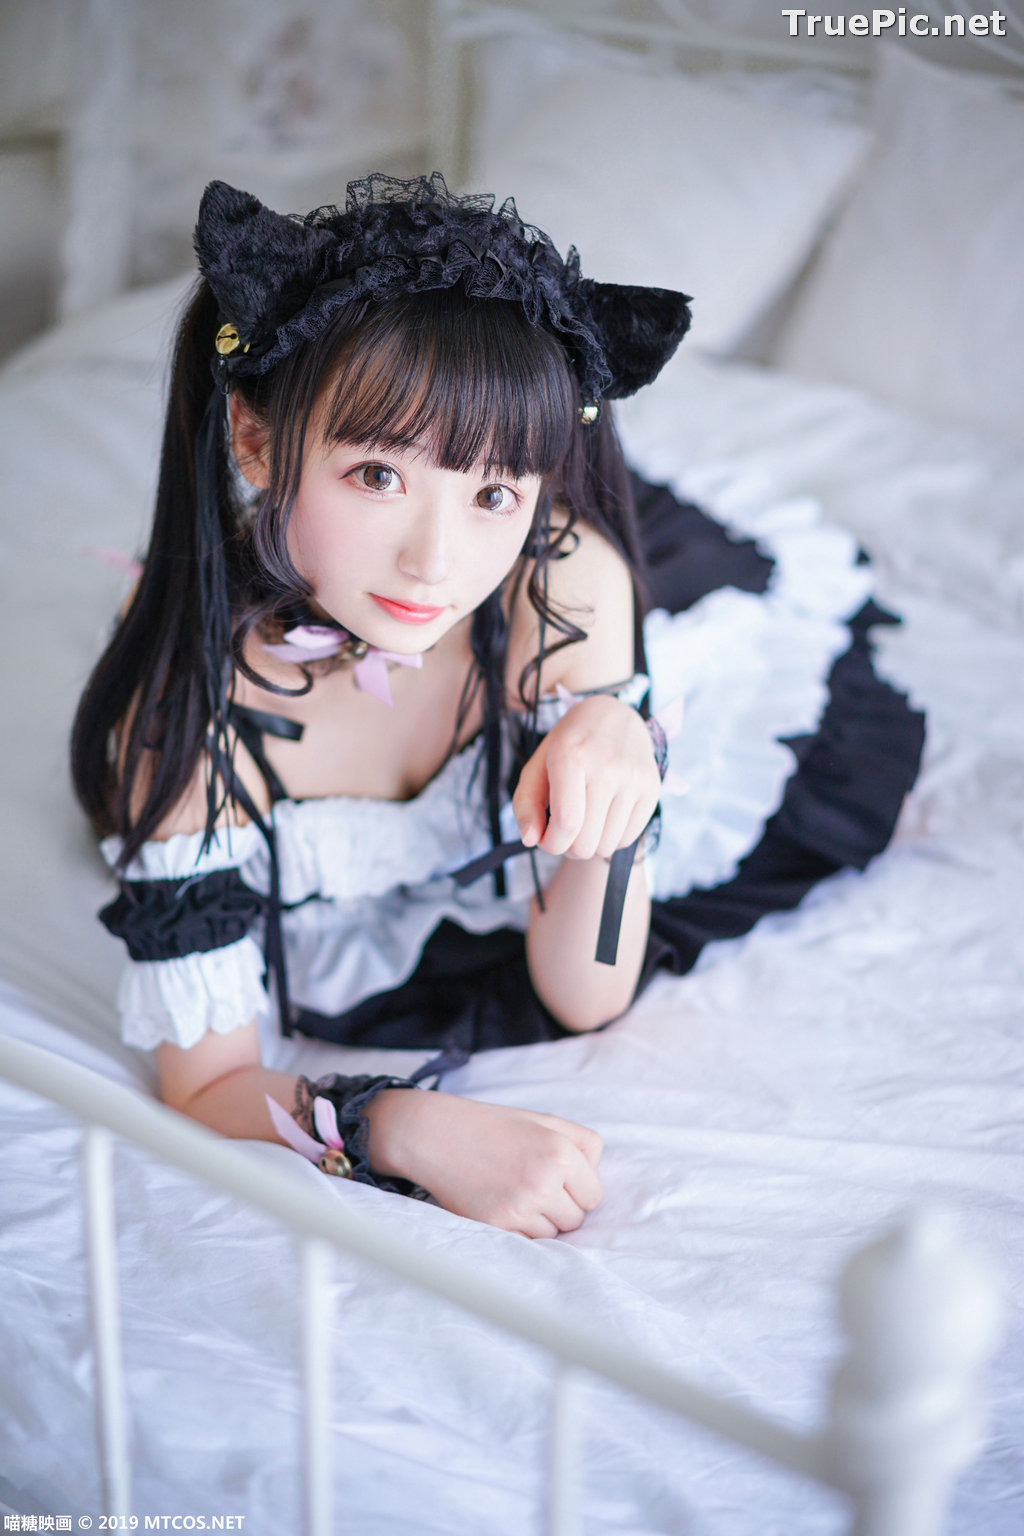 Image [MTCos] 喵糖映画 Vol.051 - Chinese Cute Model - Lovely Maid Cat - TruePic.net - Picture-24